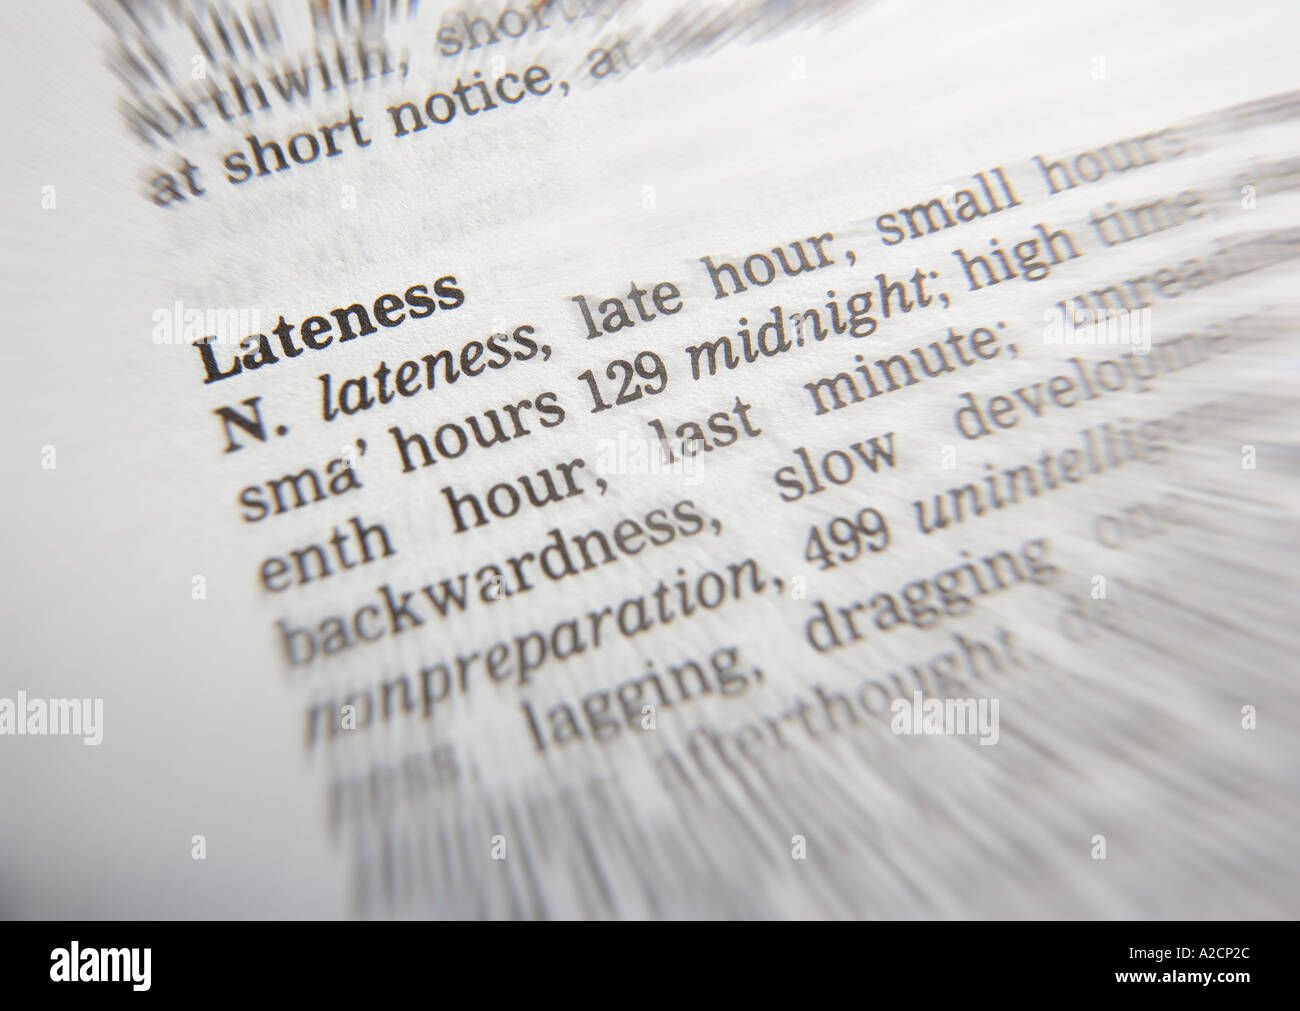 THESAURUS PAGE SHOWING DEFINITION OF WORD LATENESS Stock Photo